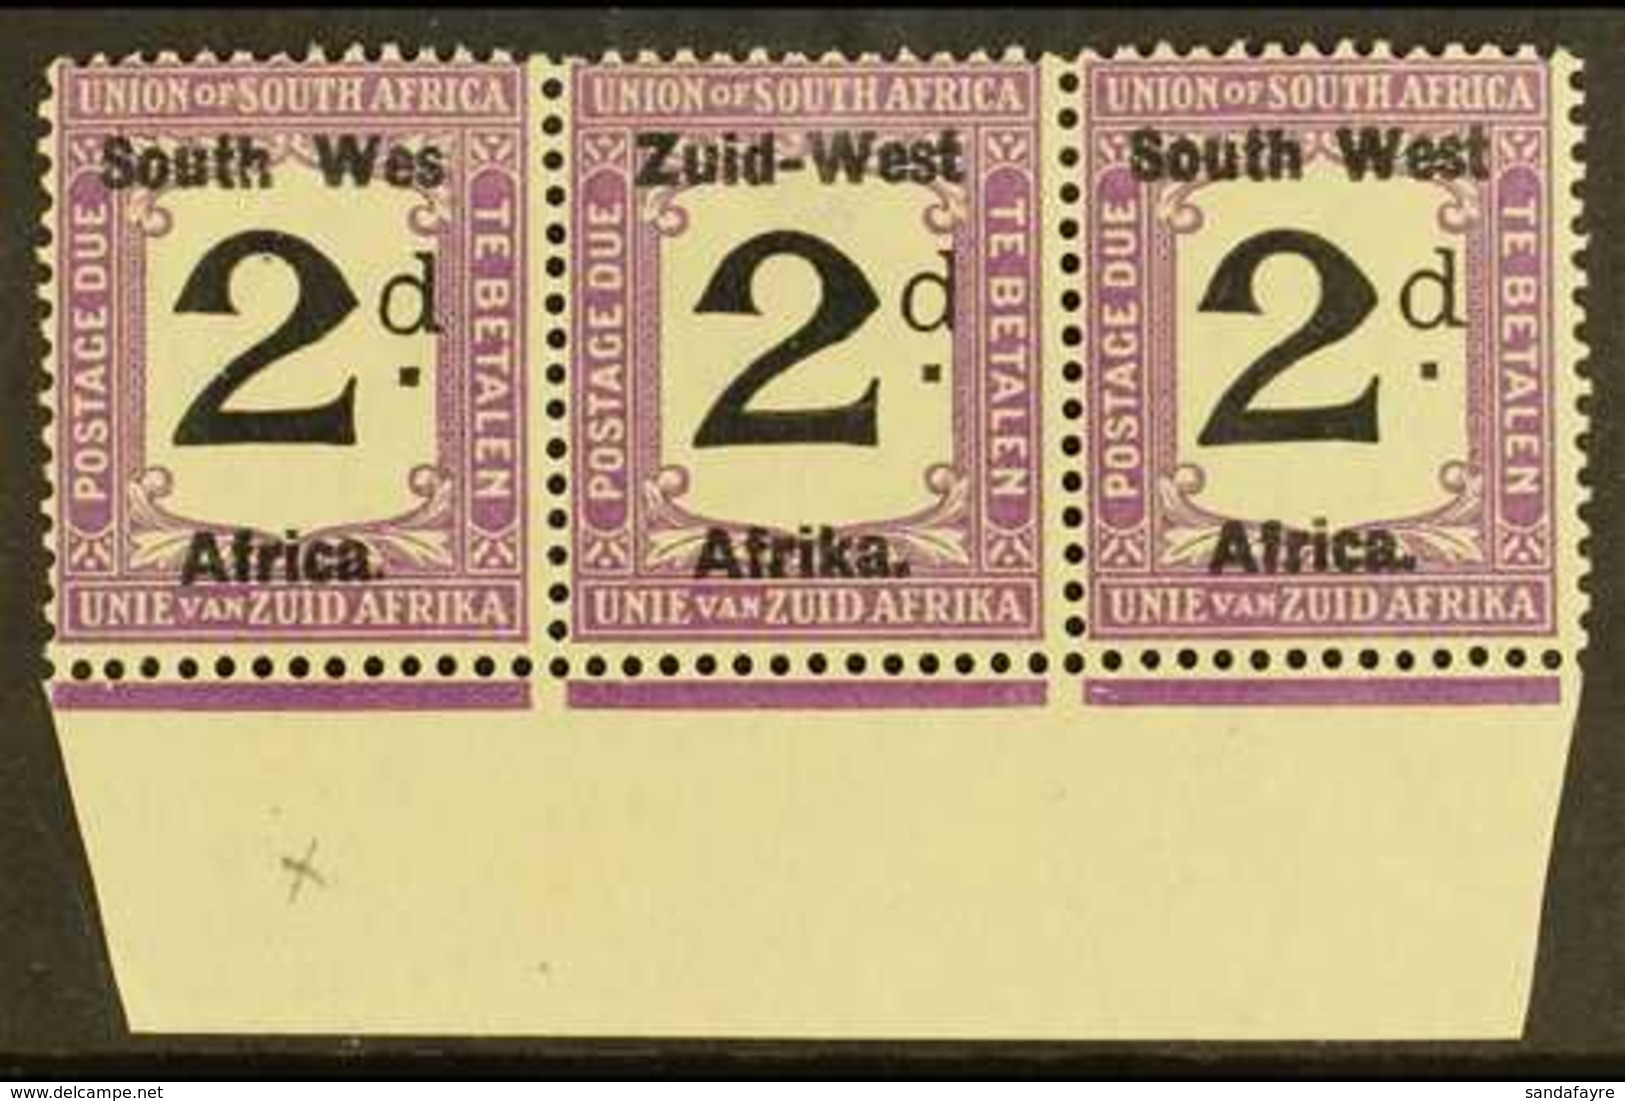 POSTAGE DUES  1923 2d Black And Violet, Marginal Strip Of 3, One Showing Variety "Wes For West", SG D3a, Very Fine NHM.  - Afrique Du Sud-Ouest (1923-1990)